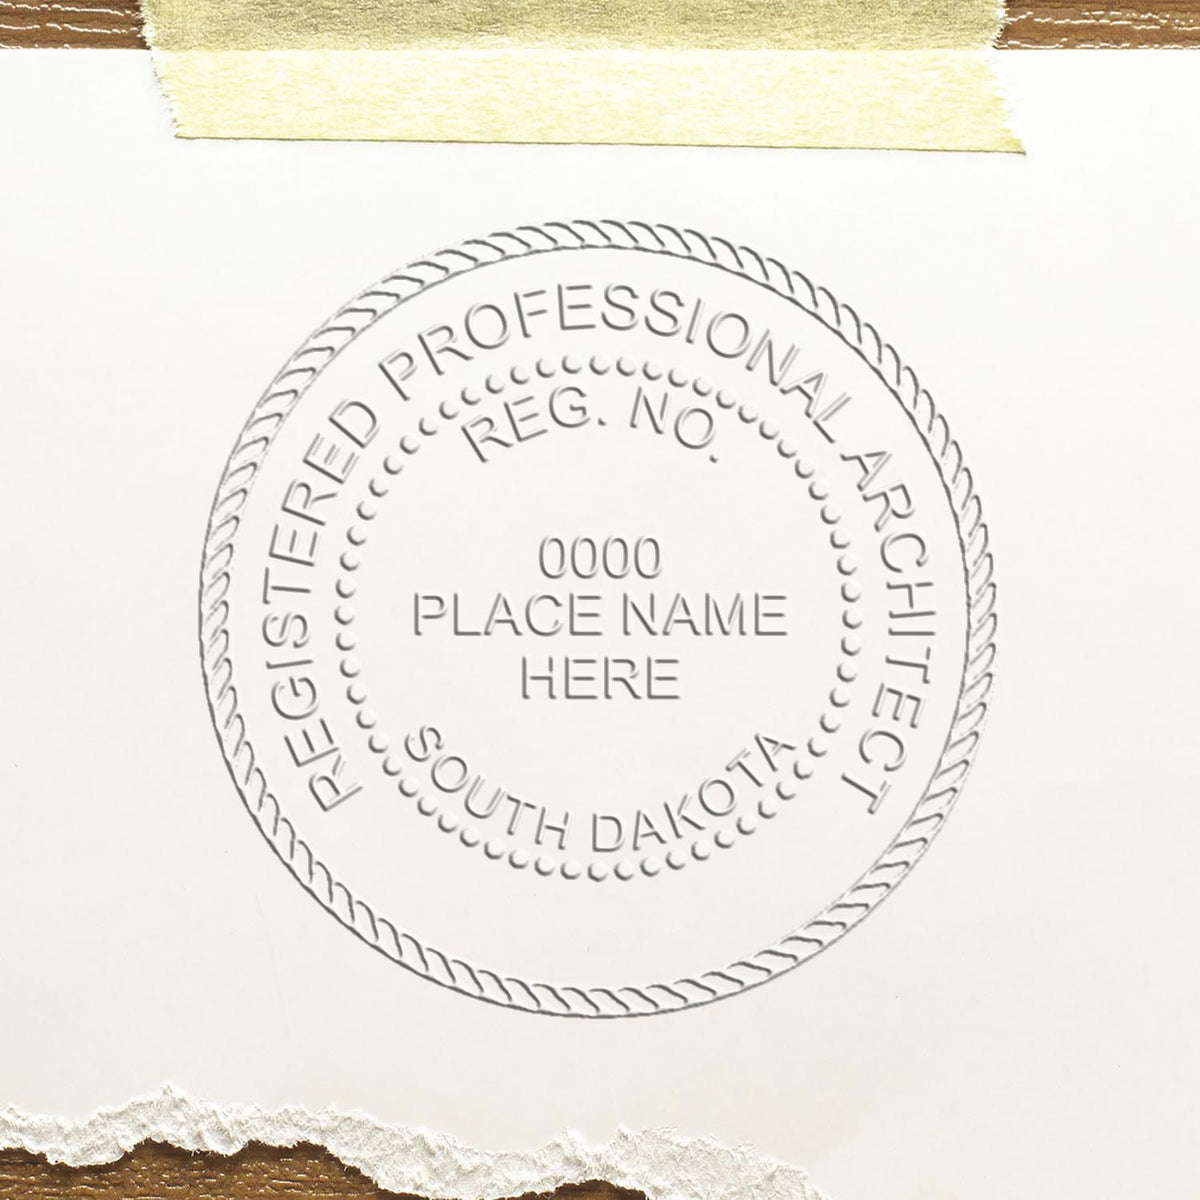 A stamped impression of the South Dakota Desk Architect Embossing Seal in this stylish lifestyle photo, setting the tone for a unique and personalized product.